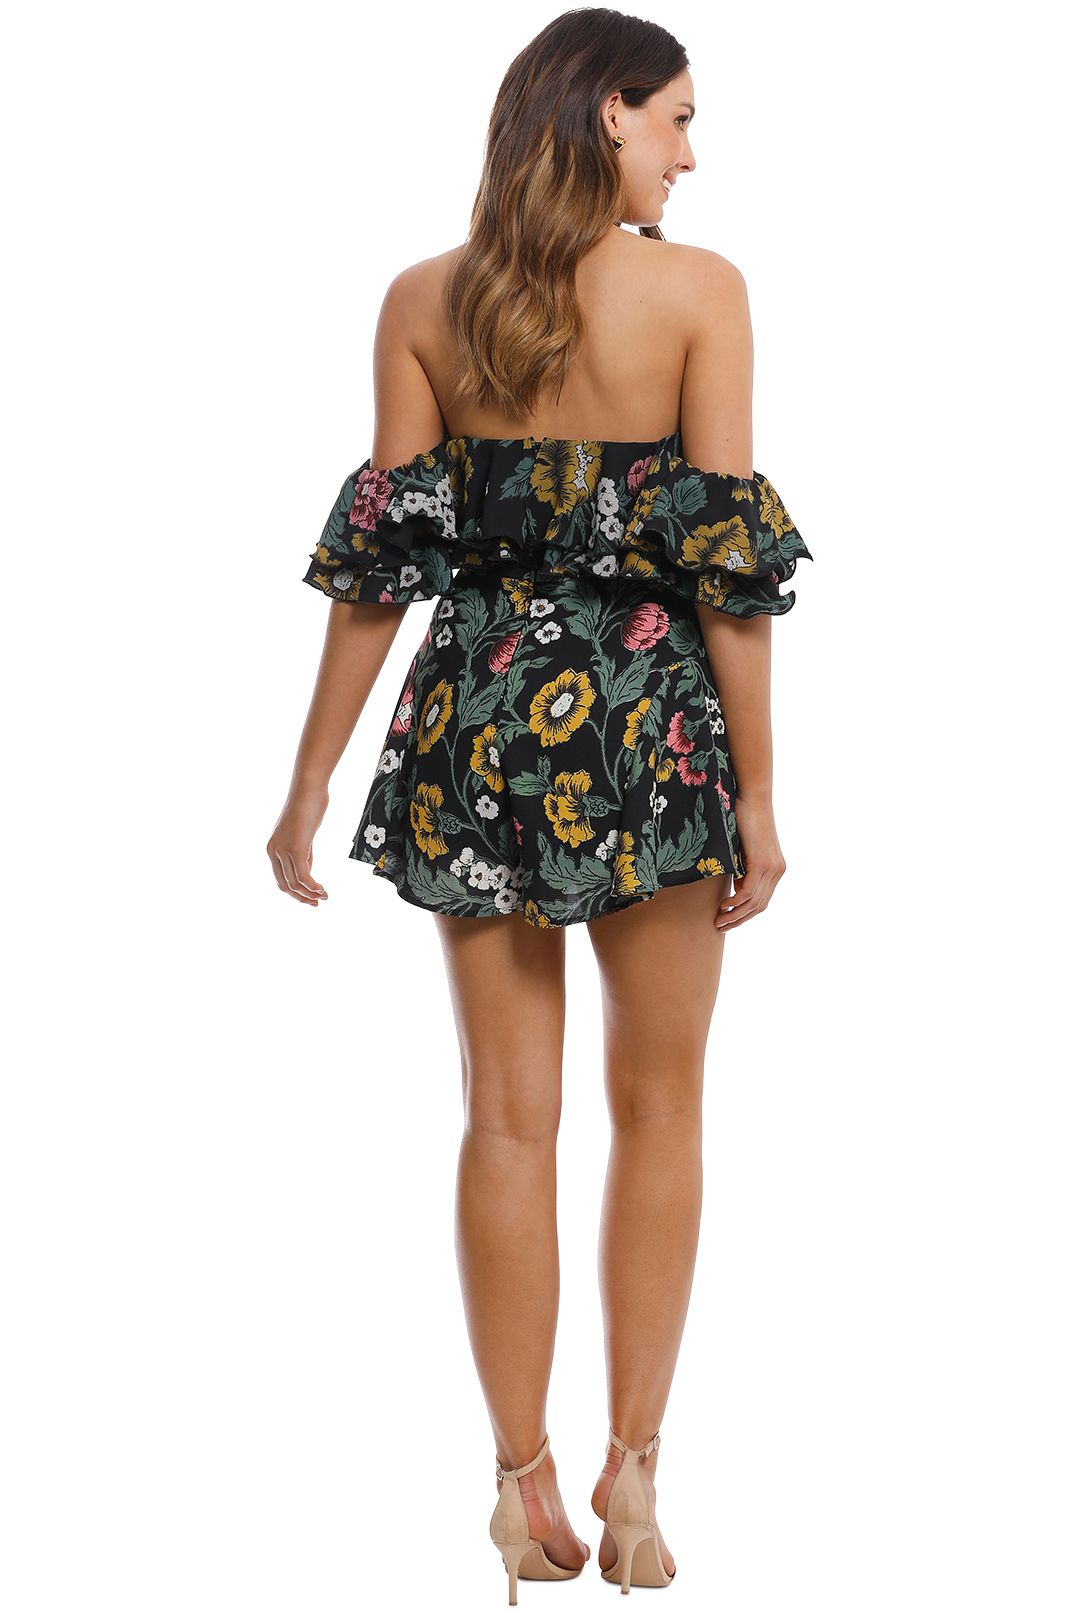 Cameo - Immerse Playsuit - Black - Back